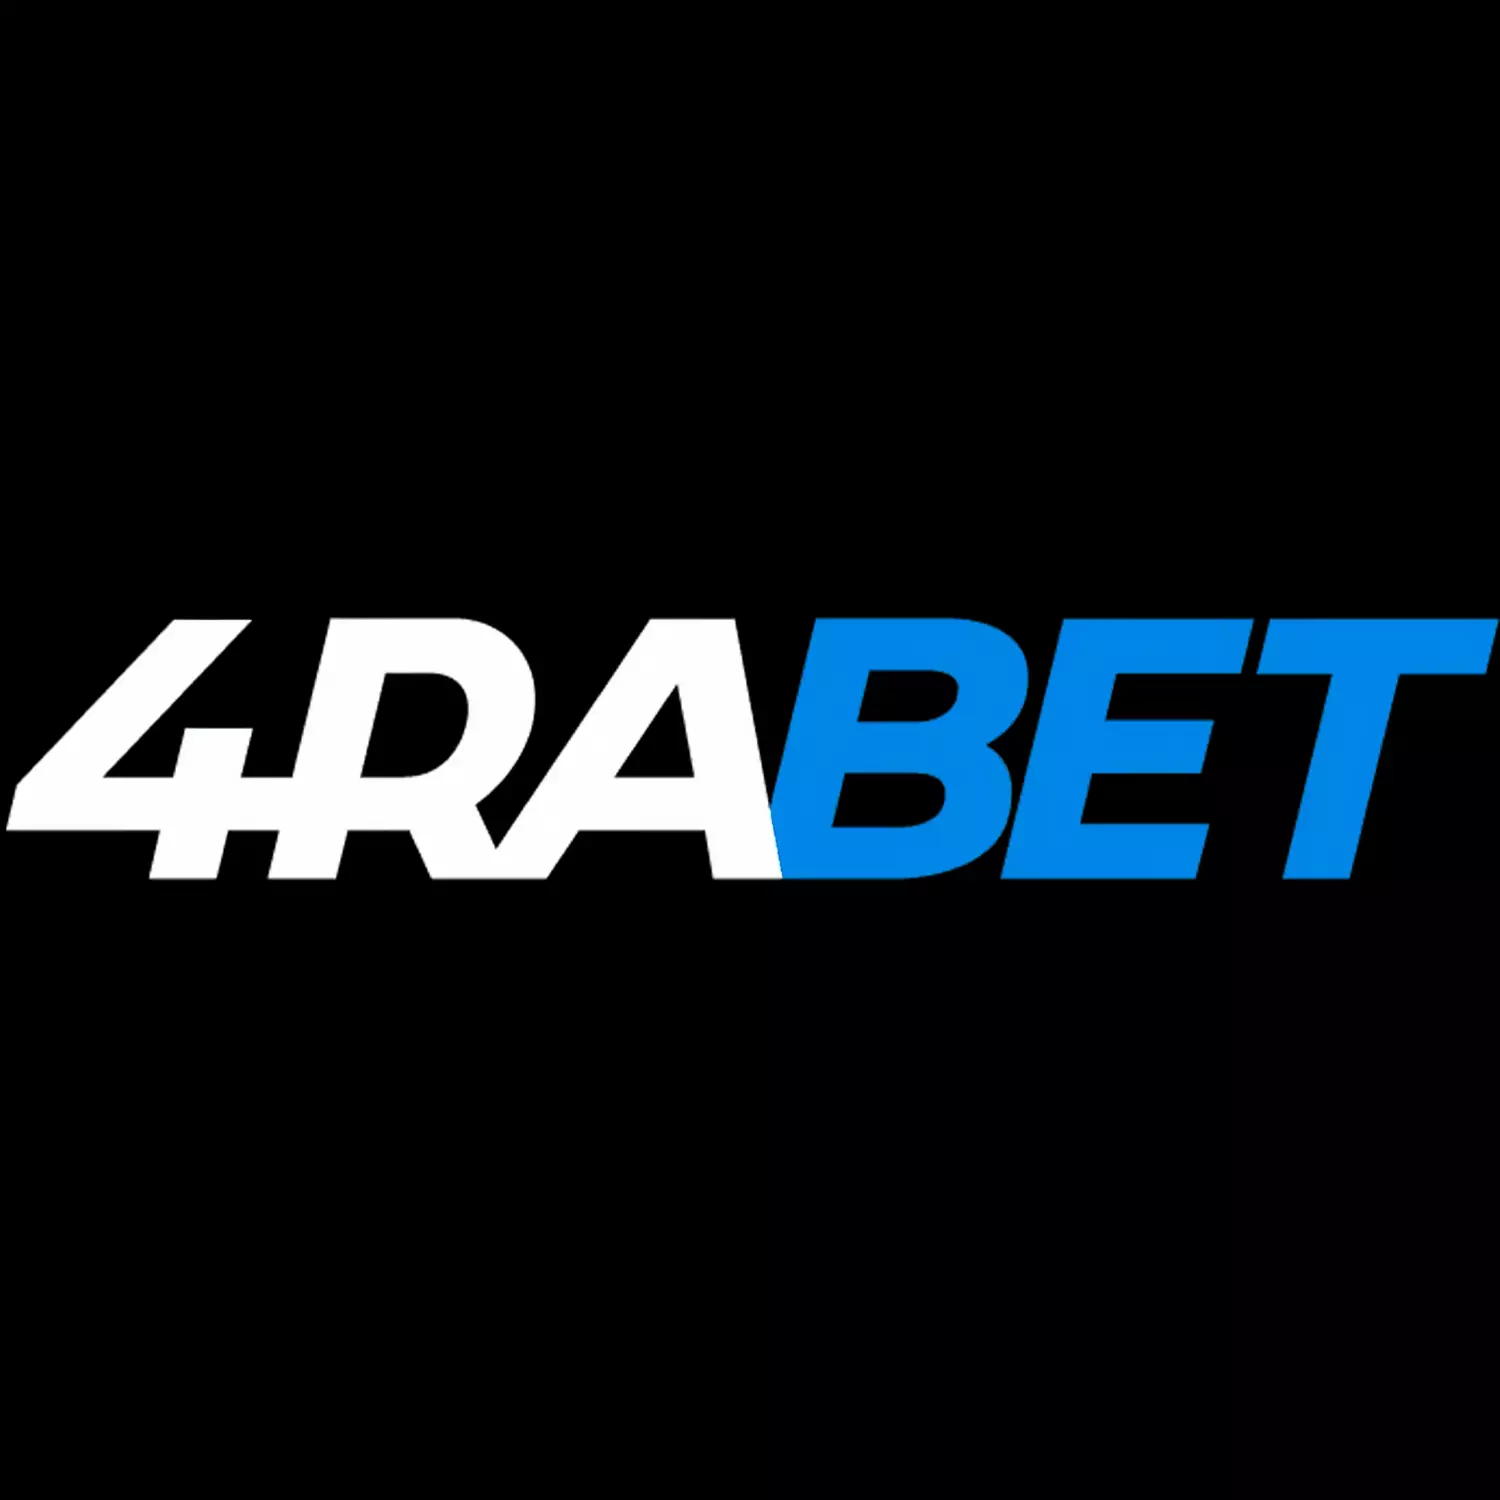 The 4rabet app is available for installation on Android and iOS smartphones.